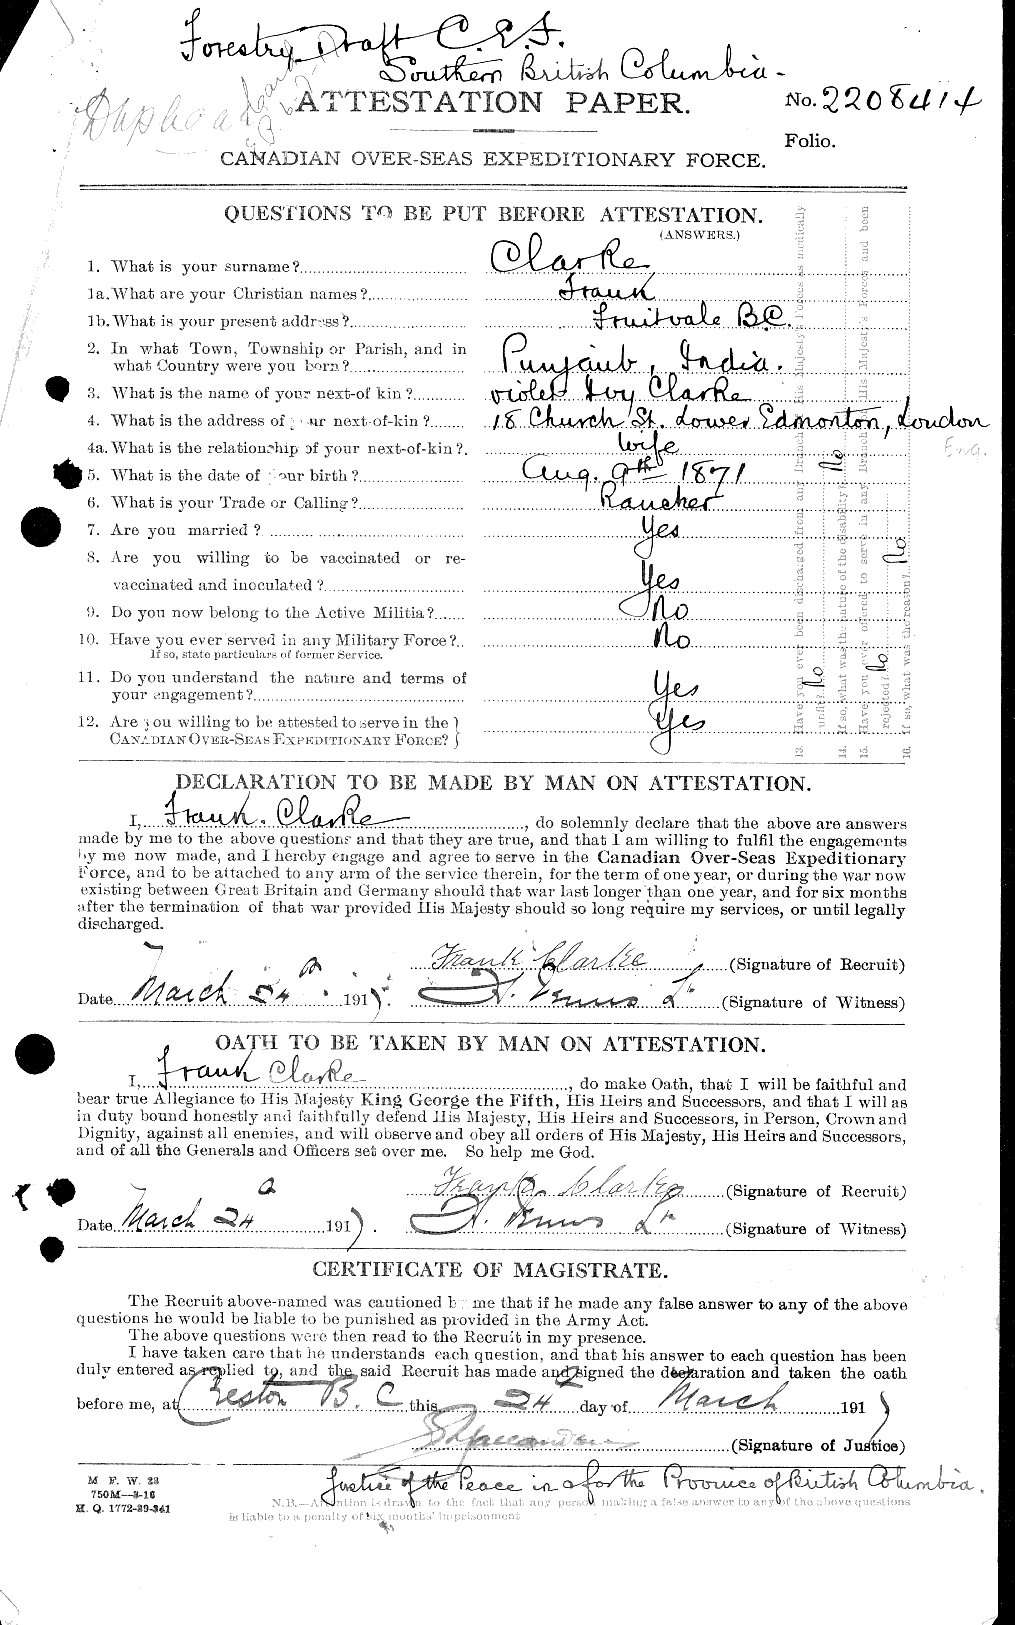 Personnel Records of the First World War - CEF 024307a